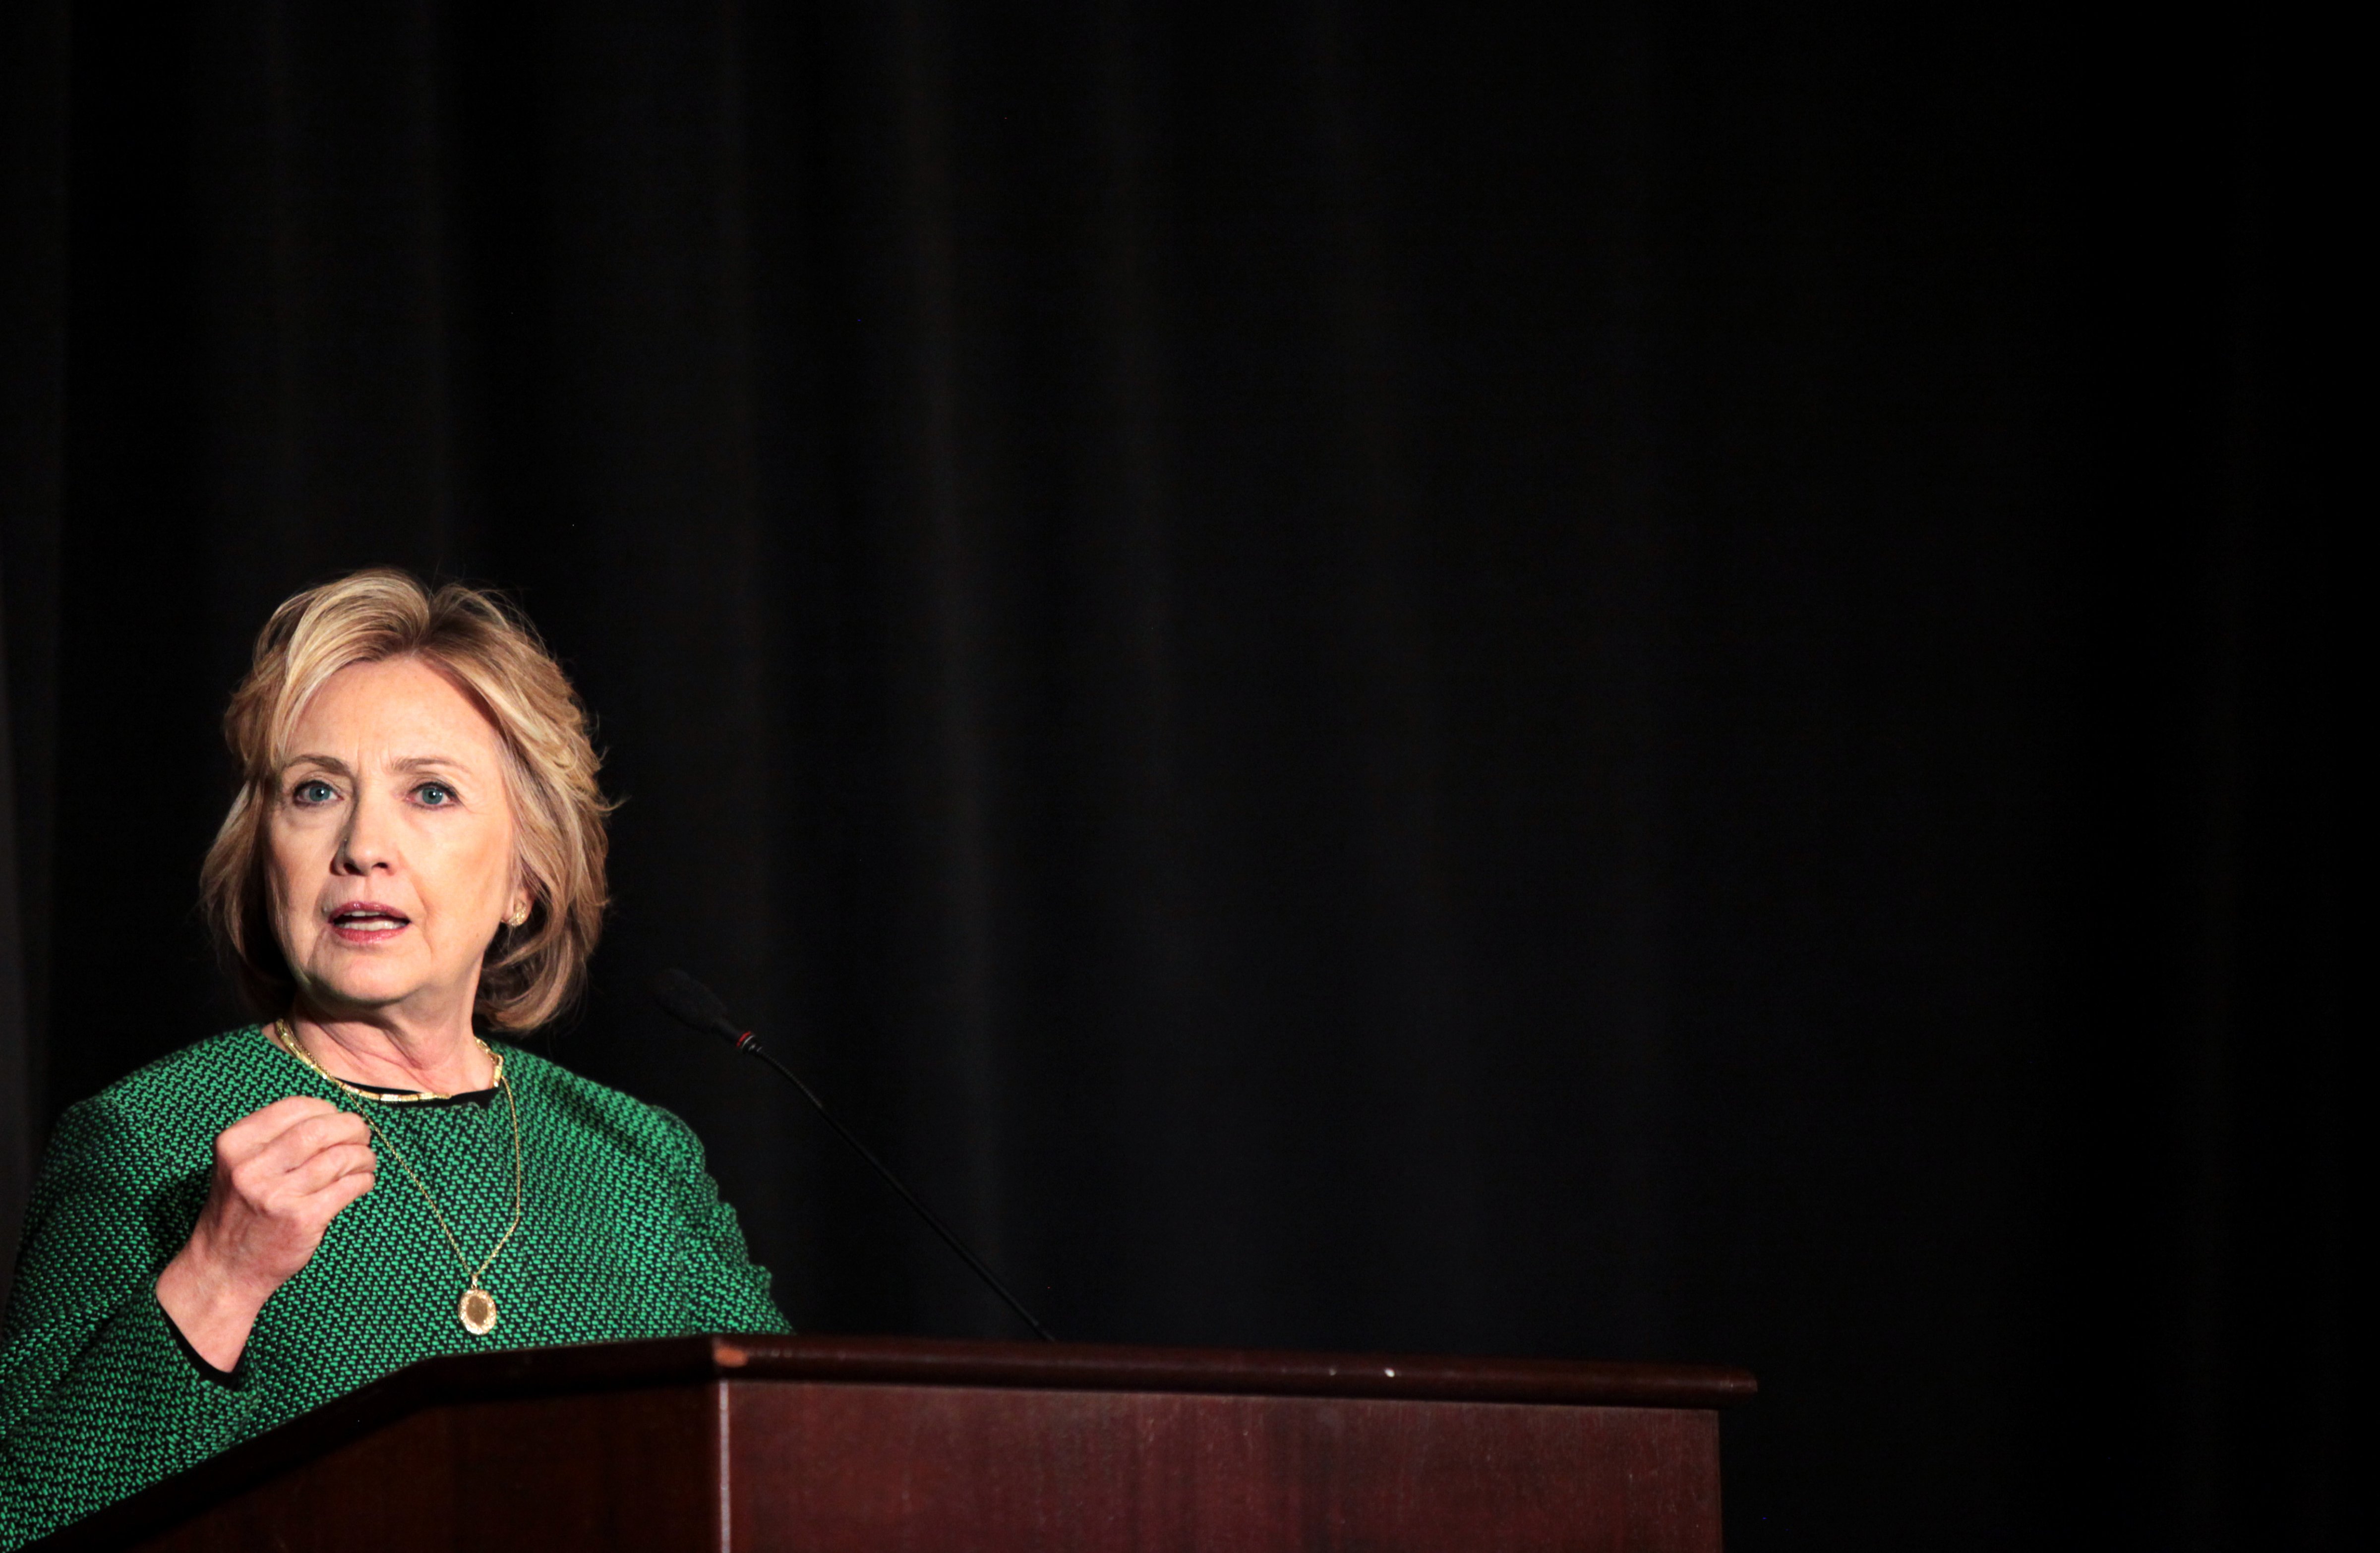 Former Secretary of State Hillary Clinton speaks on stage during a ceremony to induct her into the Irish America Hall of Fame on March 16, 2015 in New York City. (Yana Paskova&mdash;Getty Images)